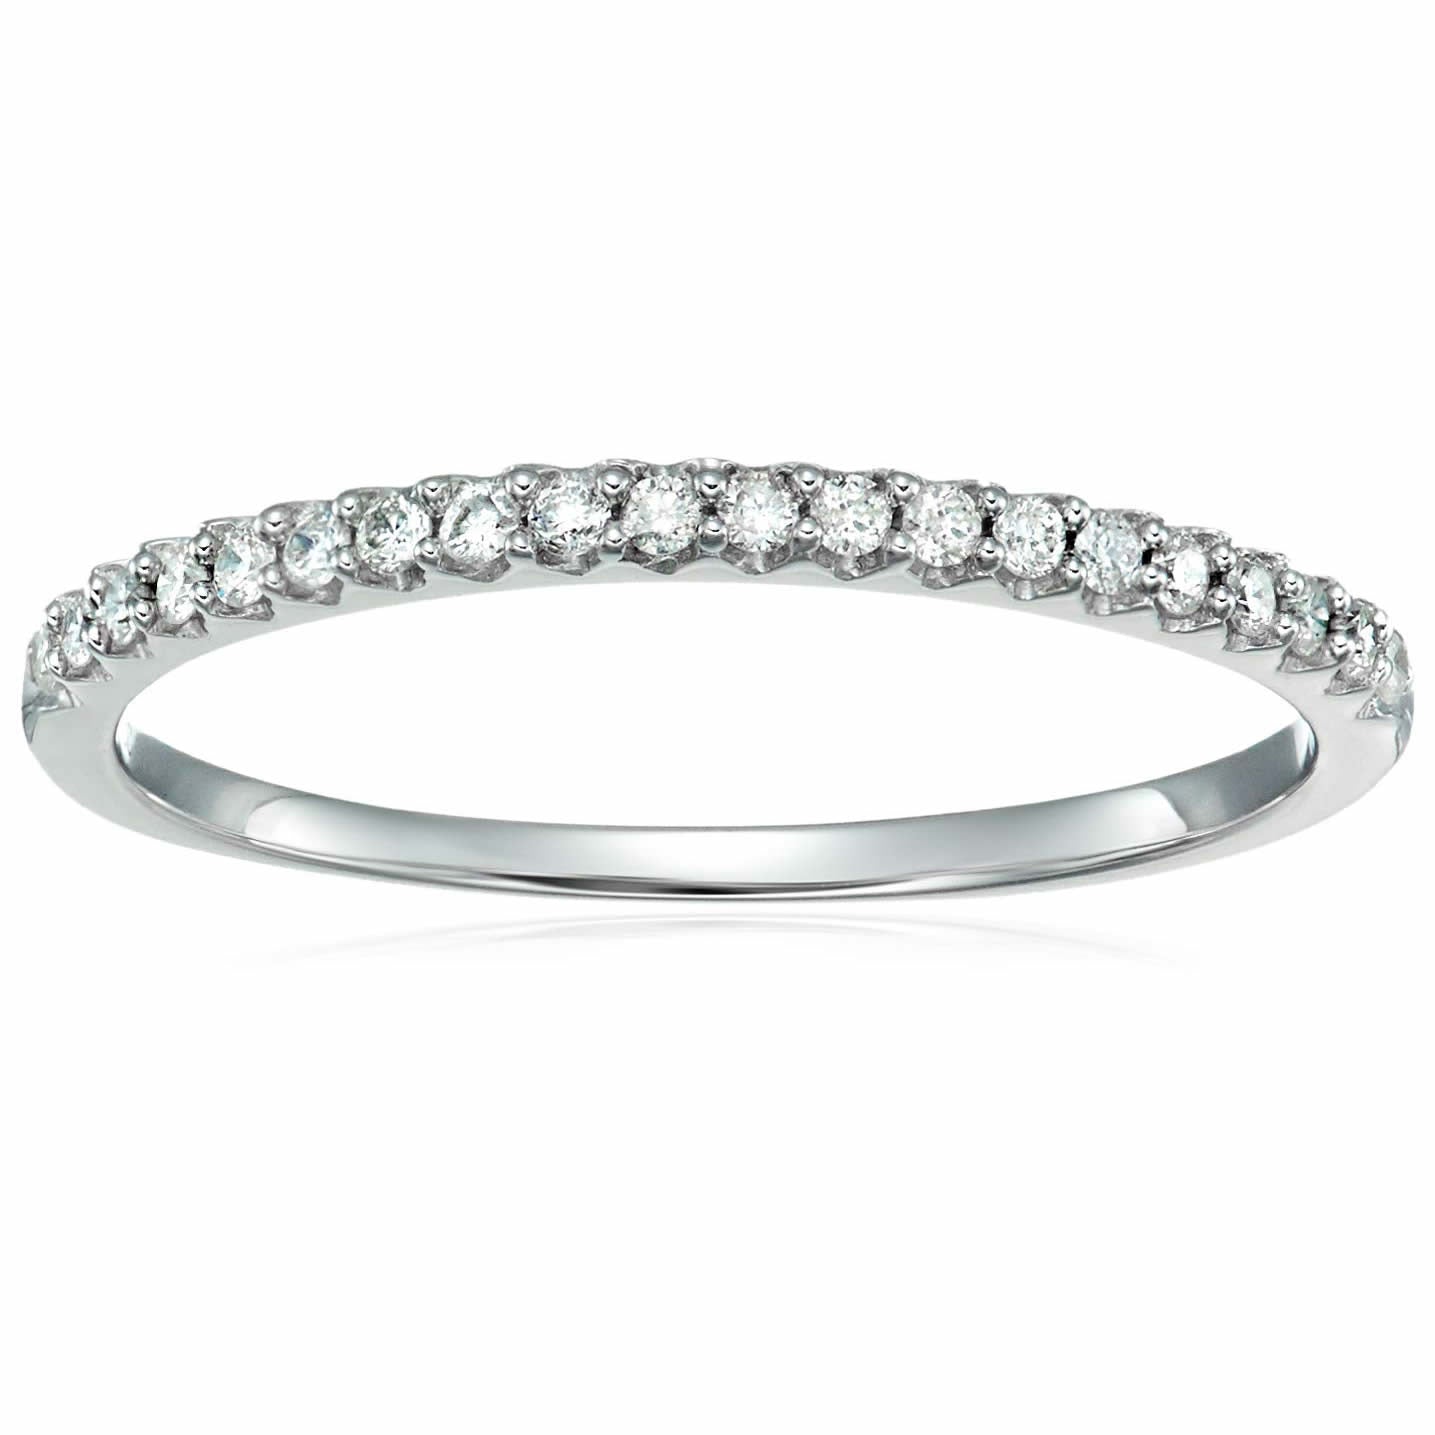 1/6 cttw Micro Pave Diamond Wedding Band for Women in 10K White Gold Prong Set, Size 4.5-10